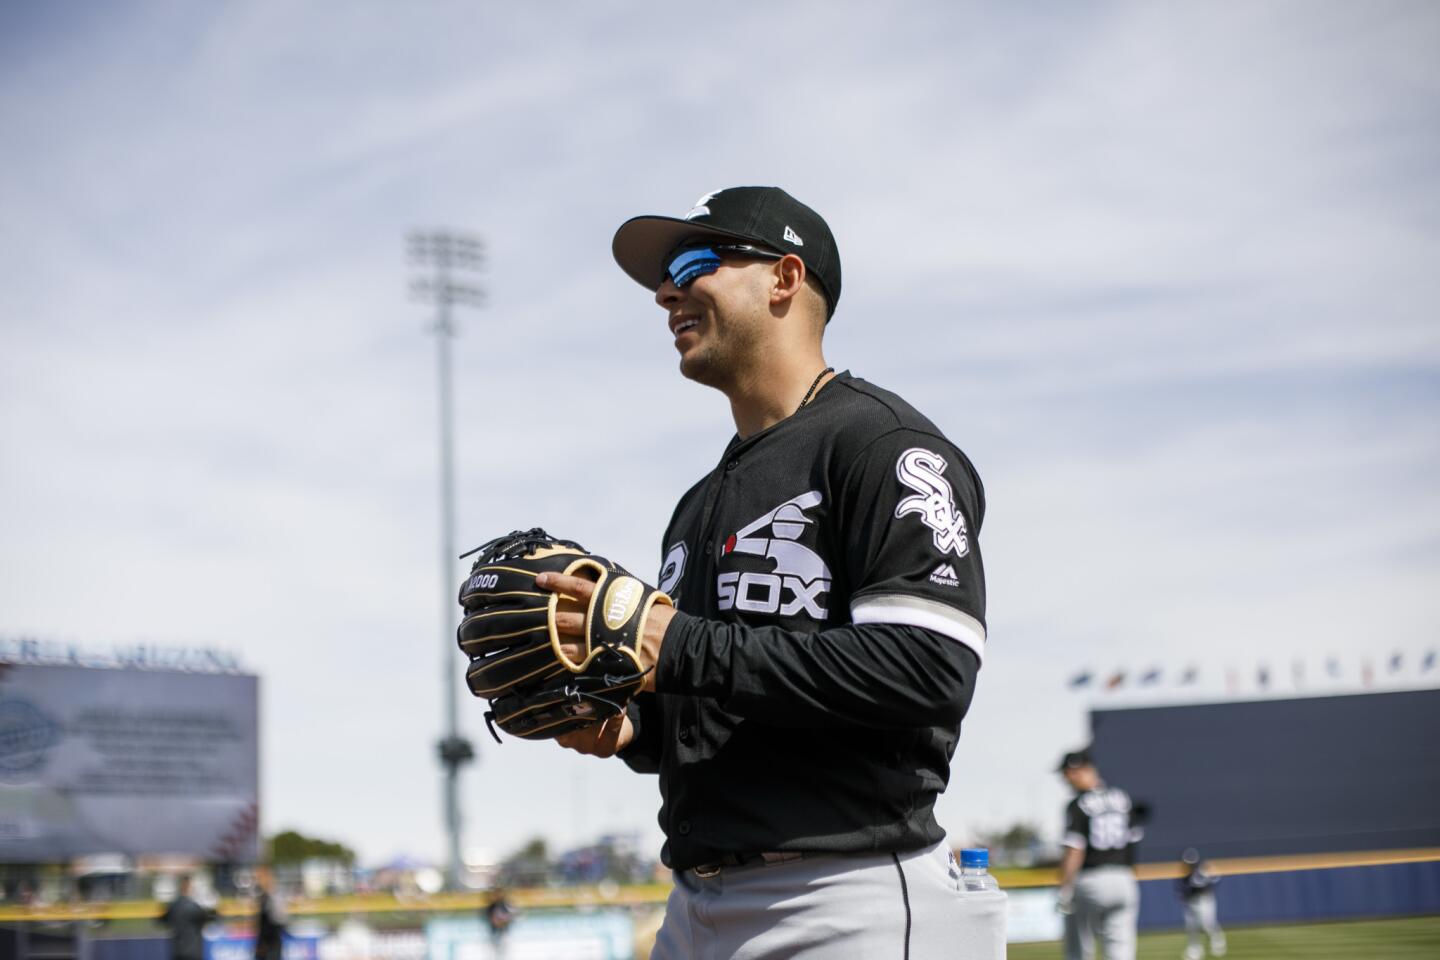 White Sox second baseman Nick Madrigal talks with fans before the first inning of a Cactus League game against the Padres at the Peoria Sports Complex on Feb. 24, 2019.